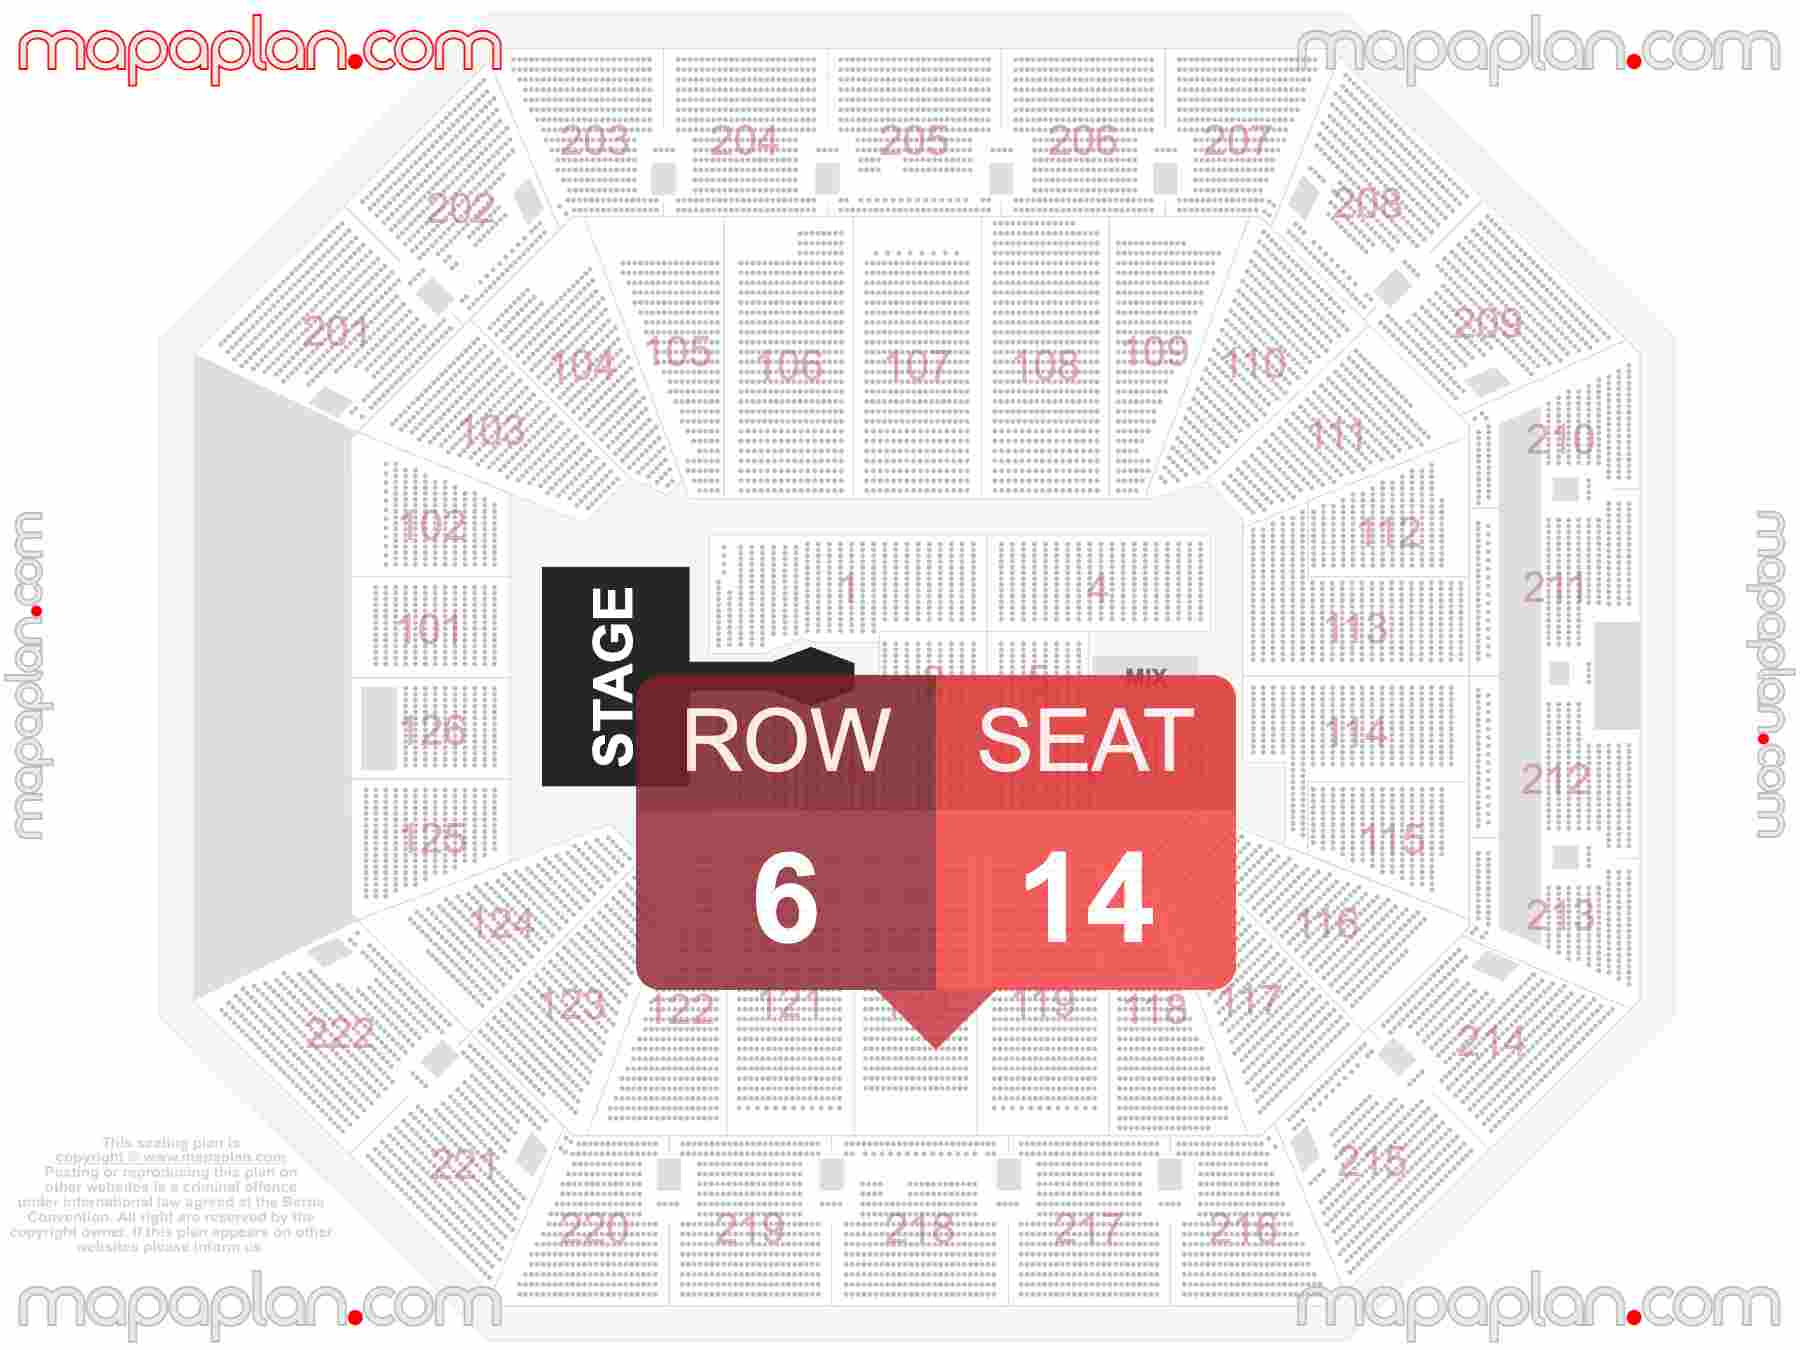 Sacramento Golden 1 Center seating chart Catwalk extended runway concert B-stage find best seats row numbering system plan showing how many seats per row - Individual 'find my seat' virtual locator